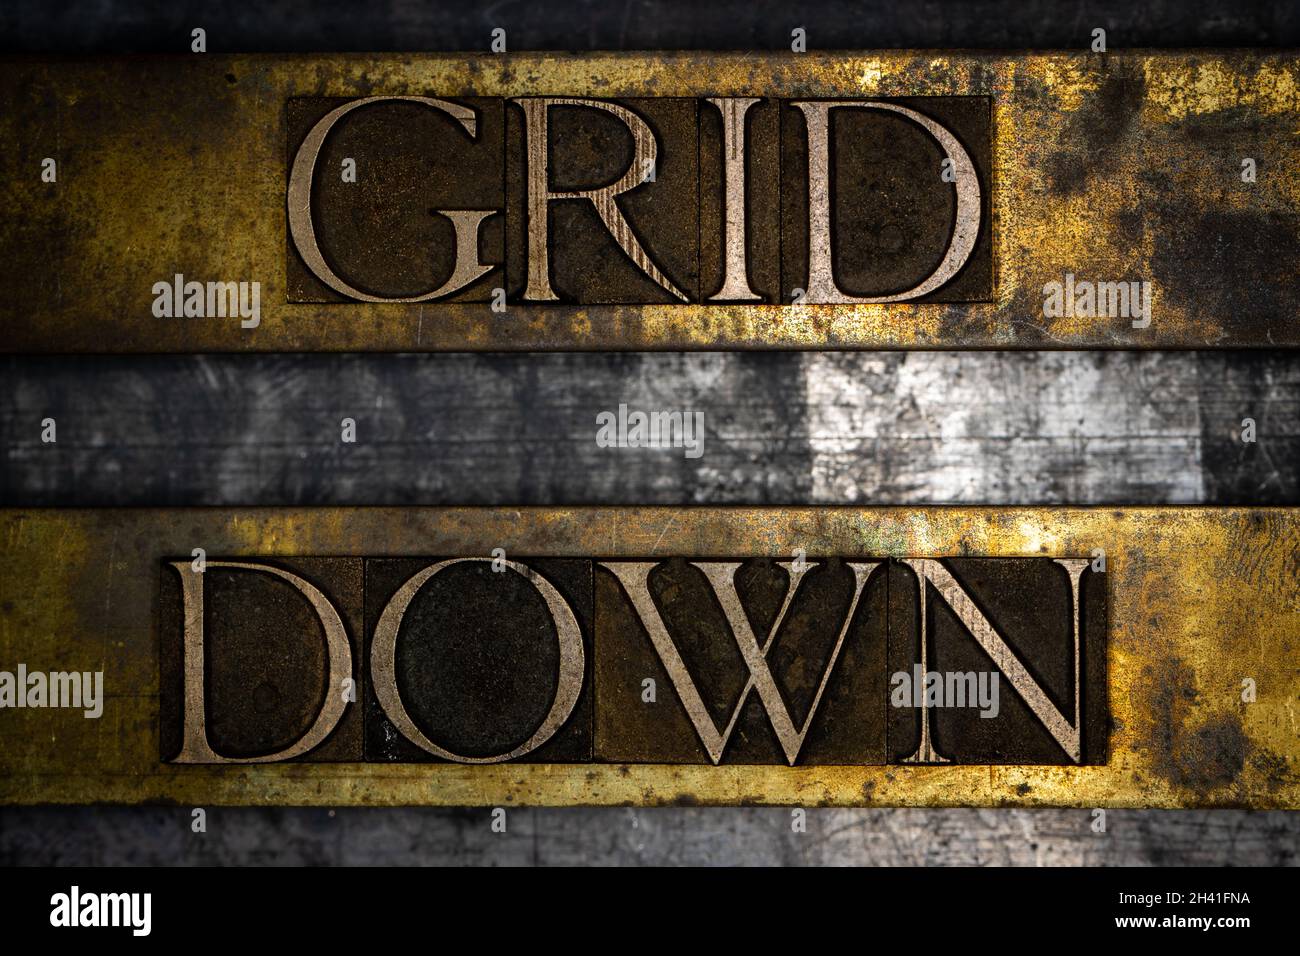 Grid Down text on vintage textured grunge copper and gold background Stock Photo